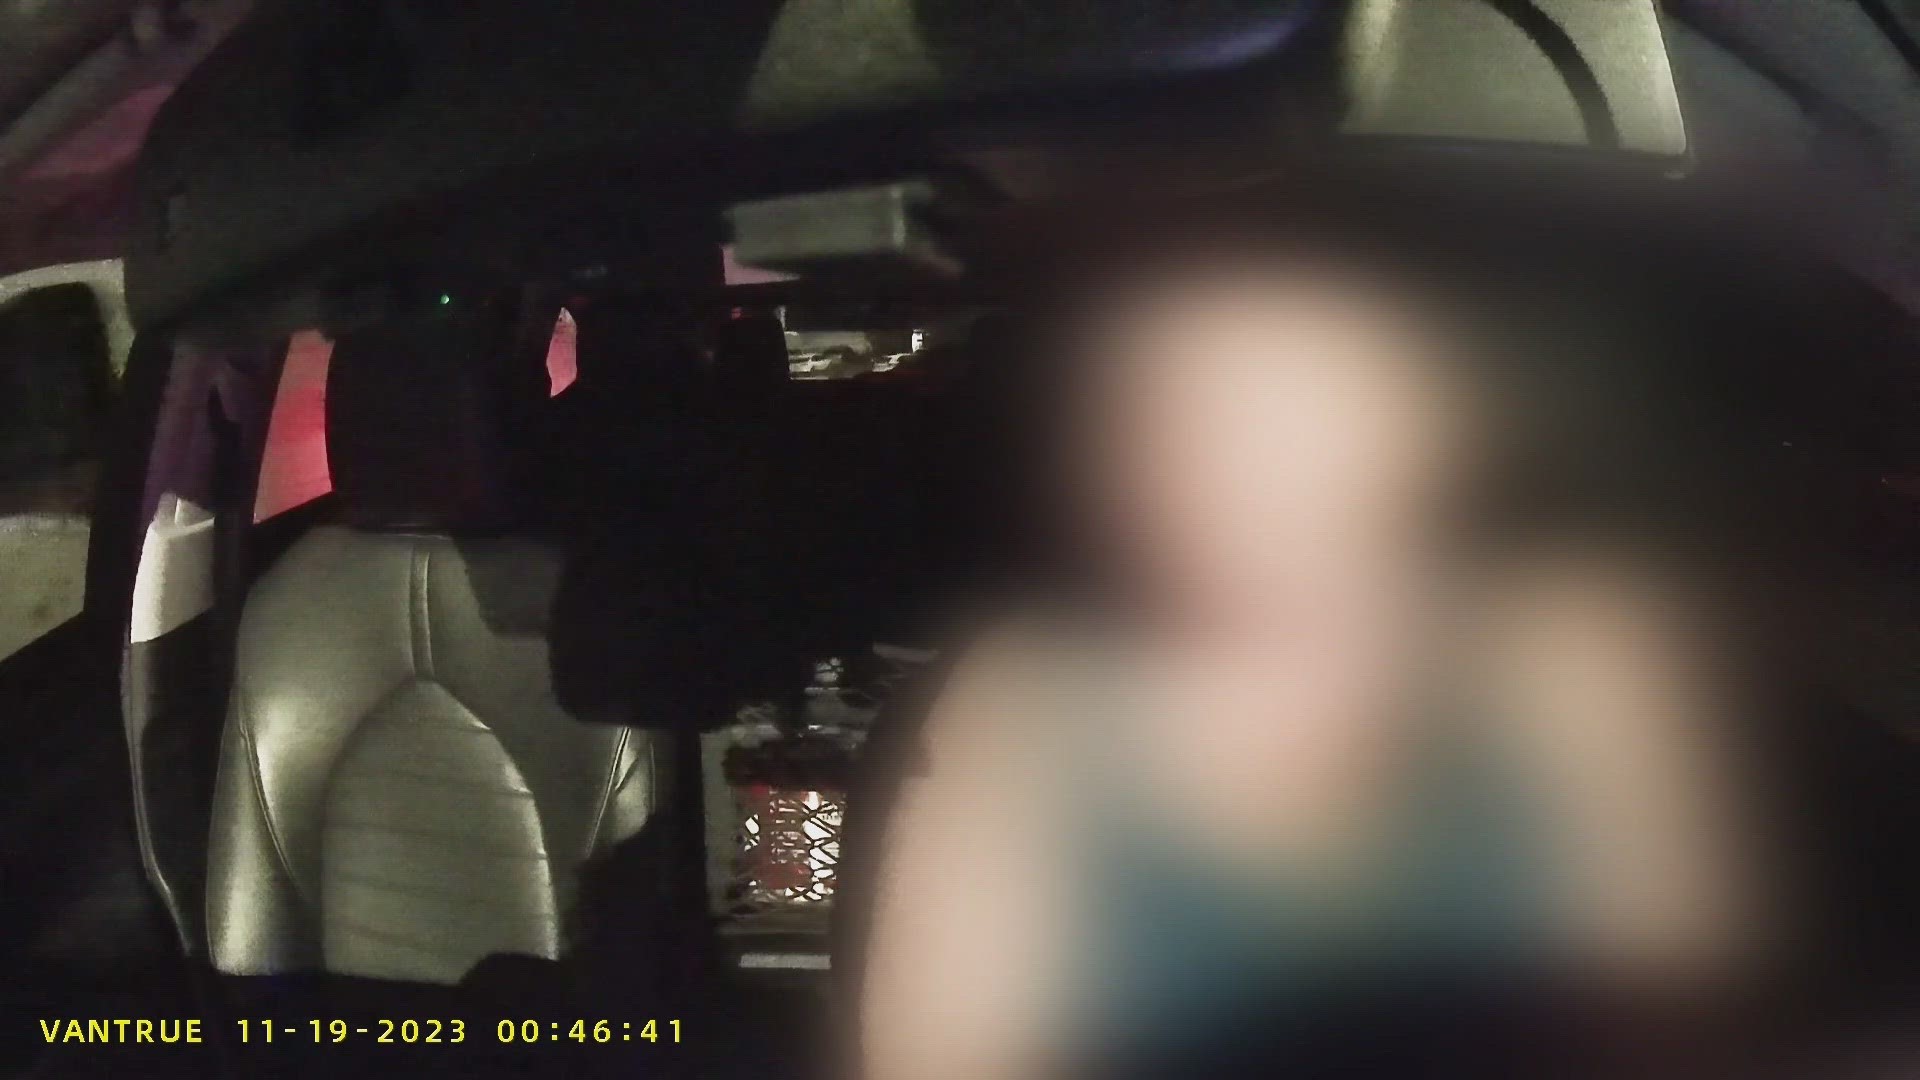 Dashcam video shows the Fort Worth passenger threatening to hit the driver